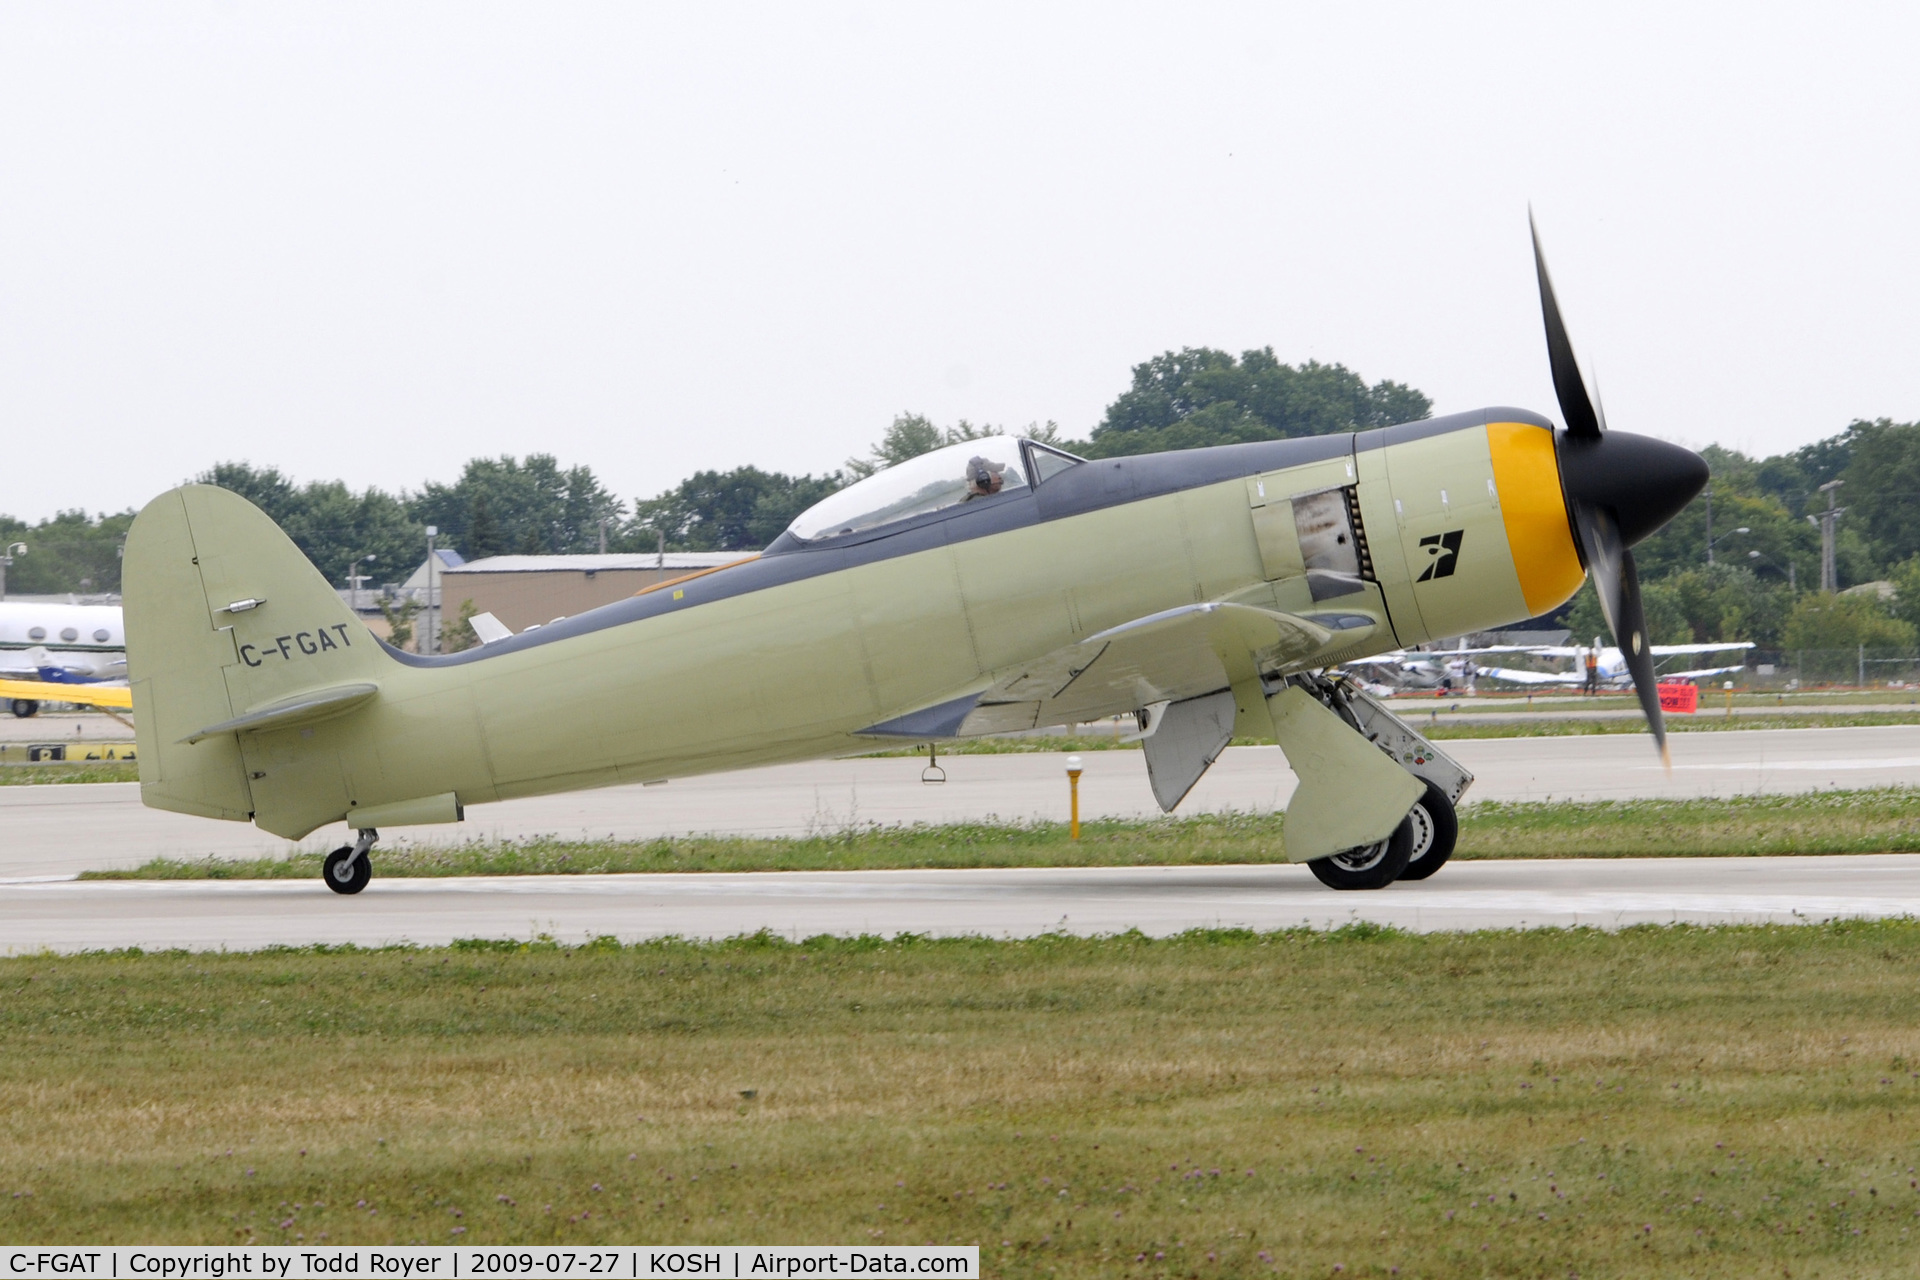 C-FGAT, 1957 Hawker Sea Fury T.20S C/N 41H/623282, Taxi to parking